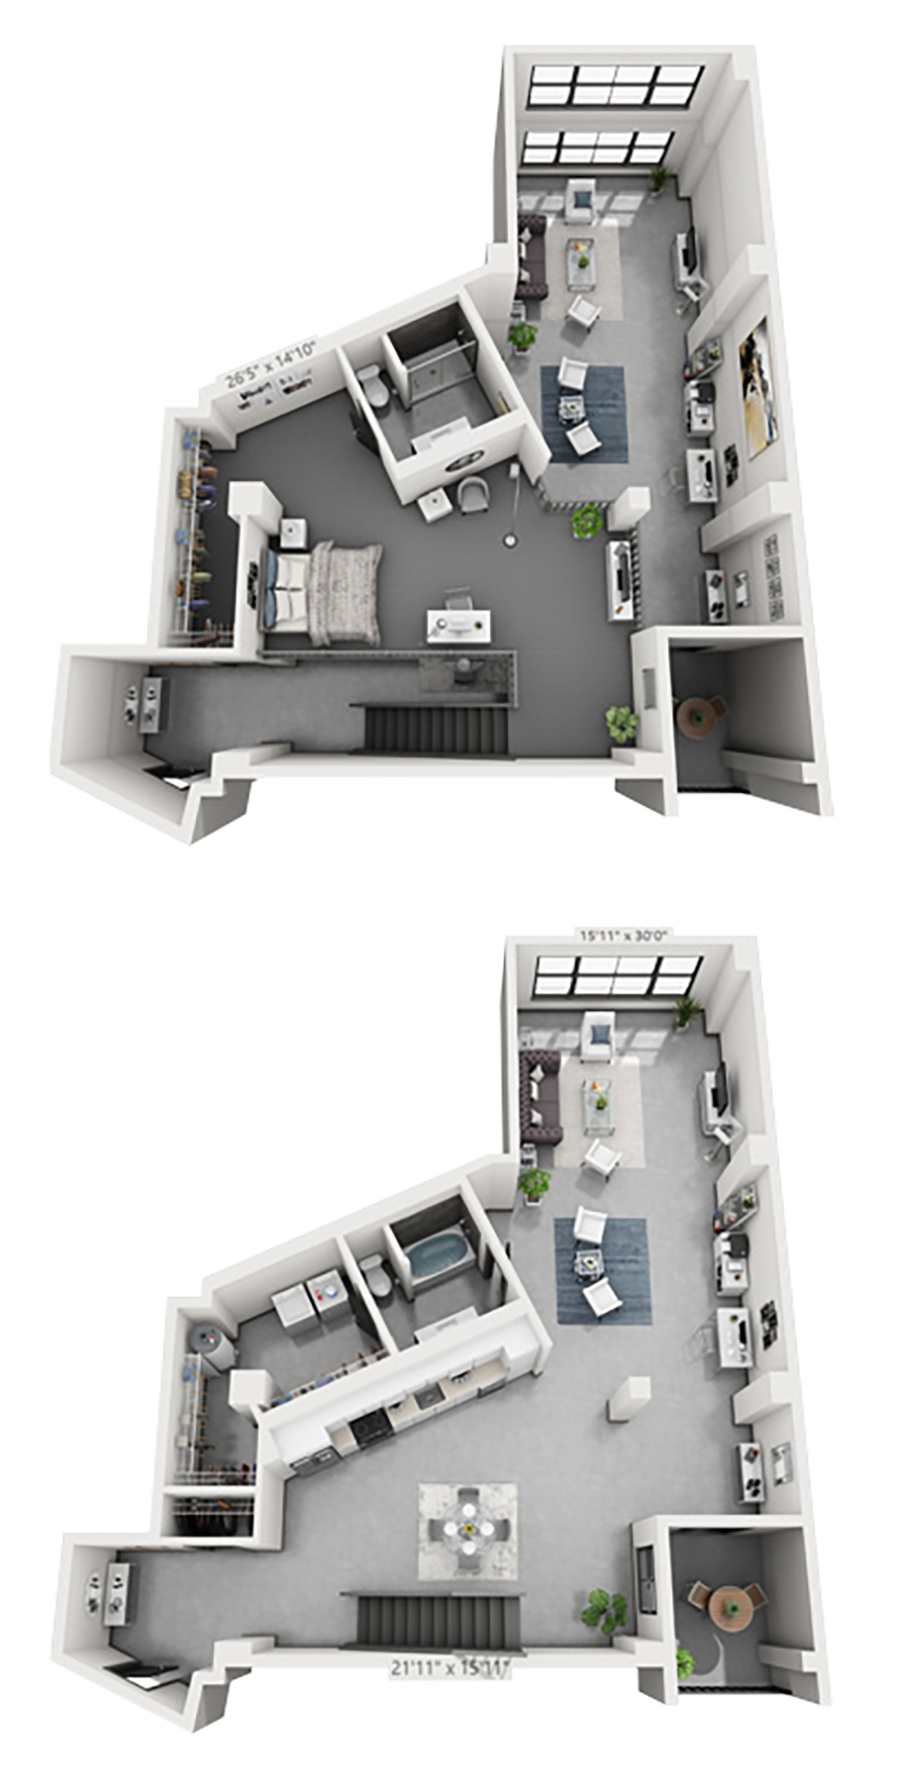 B20 plan is 2 bed, 2 bath and 1,884 square feet